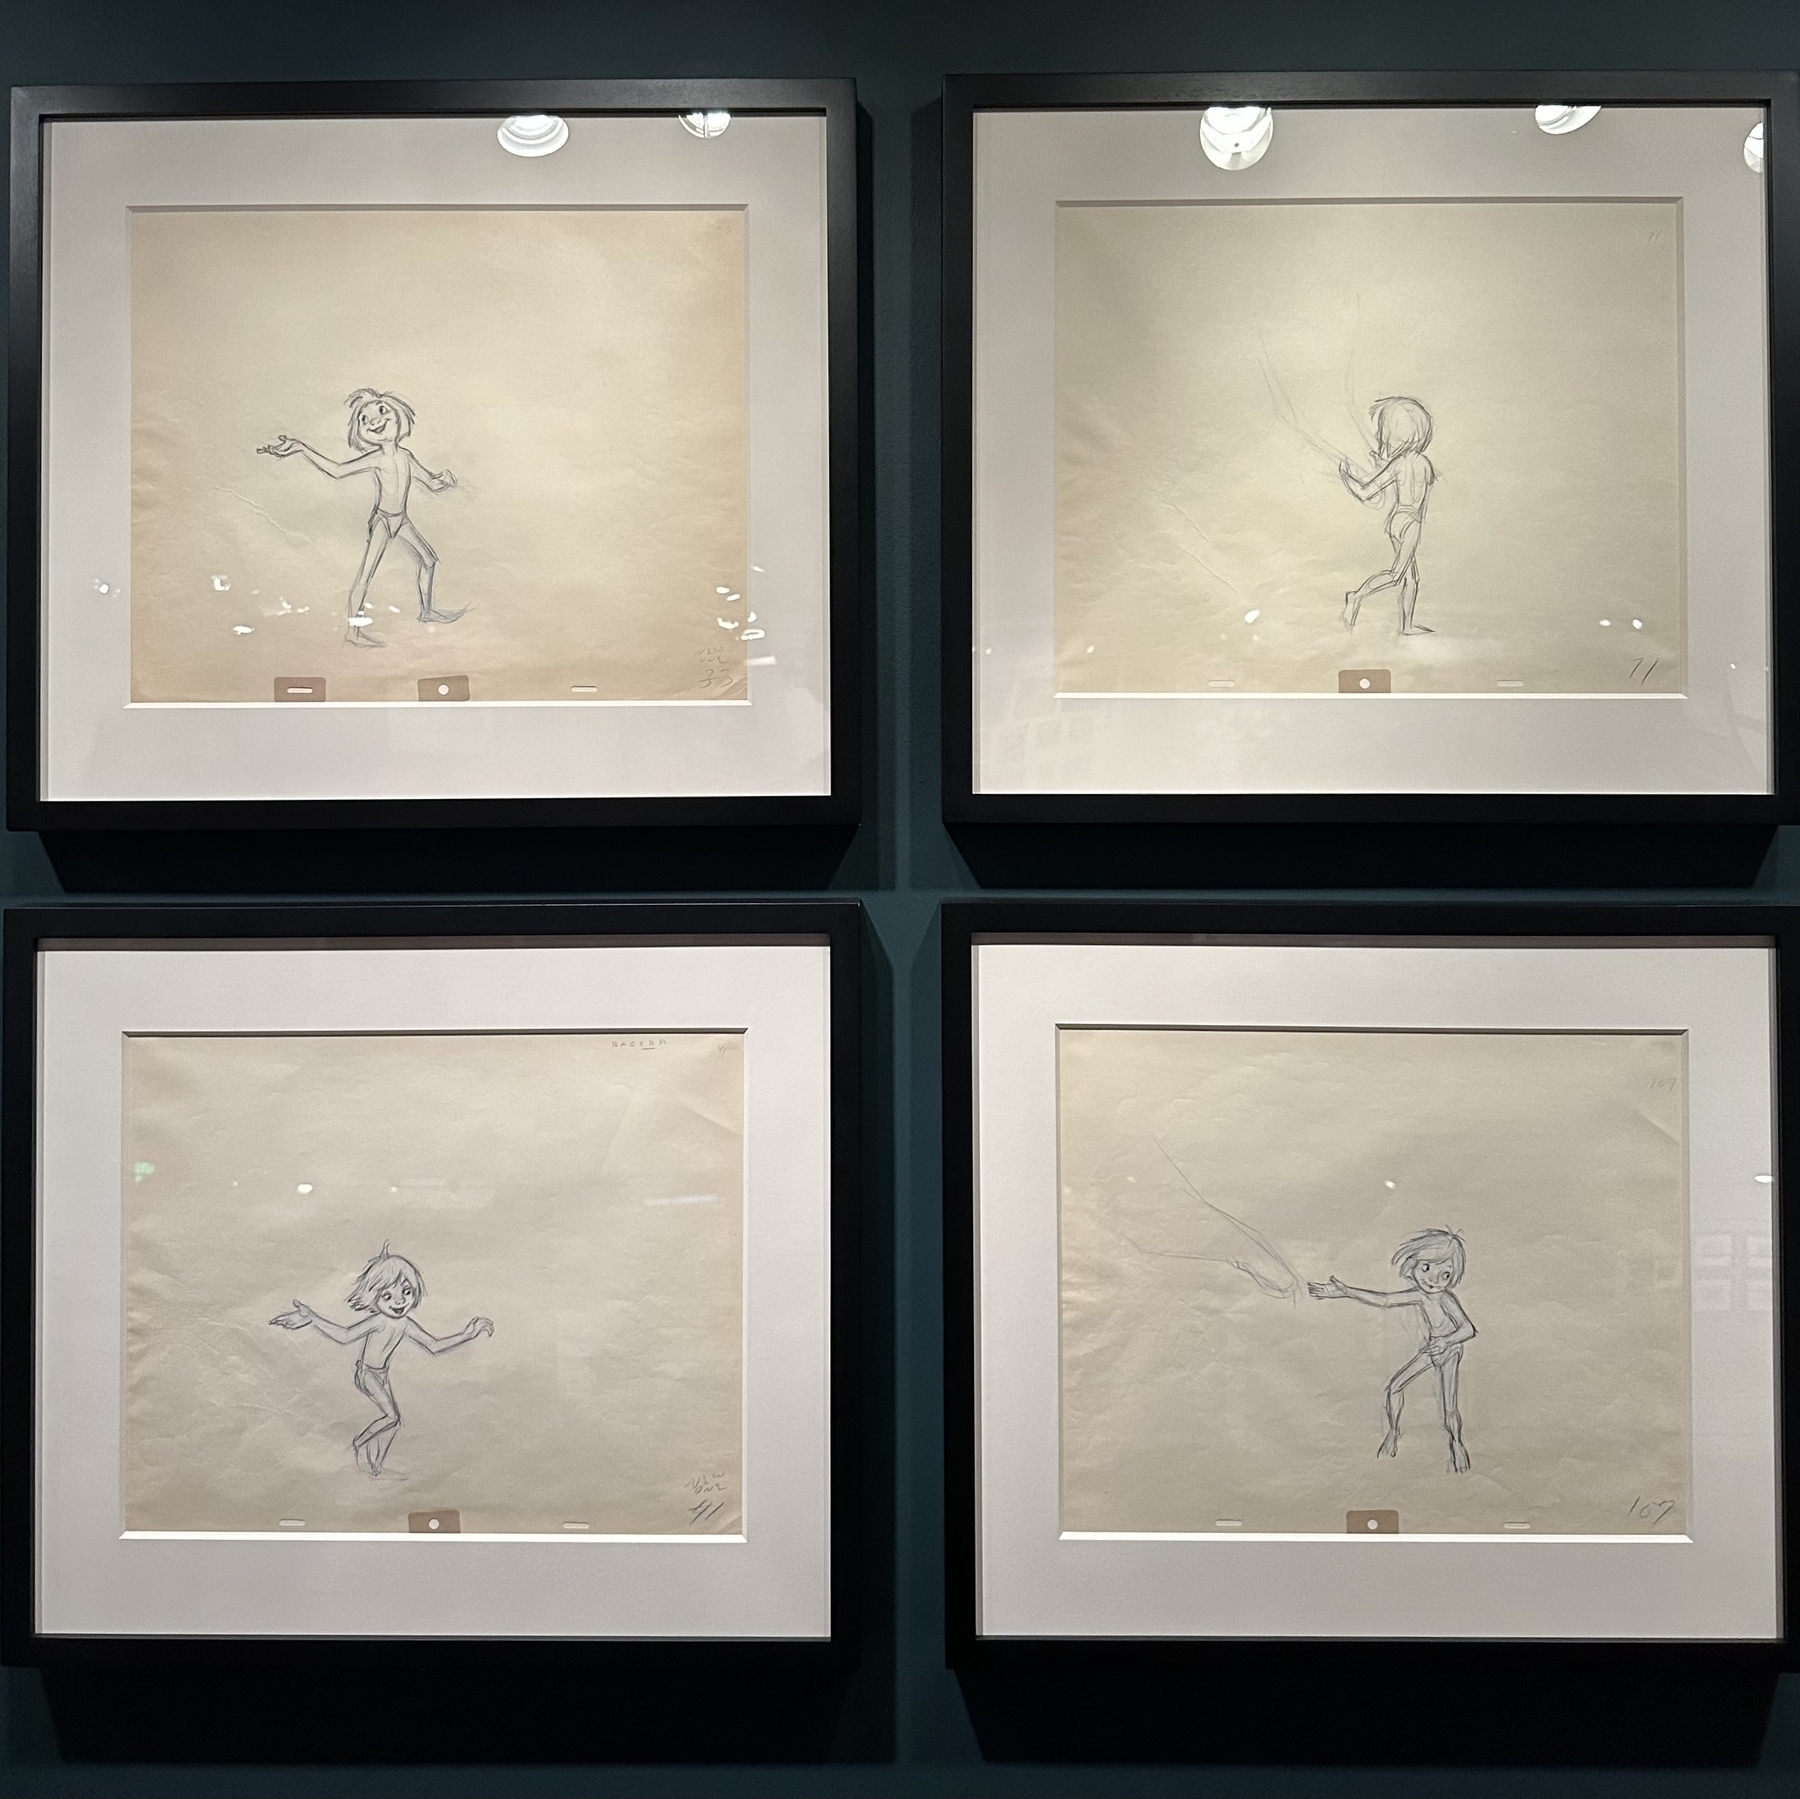 4 drawings by Frank Thomas from Jungle Book.